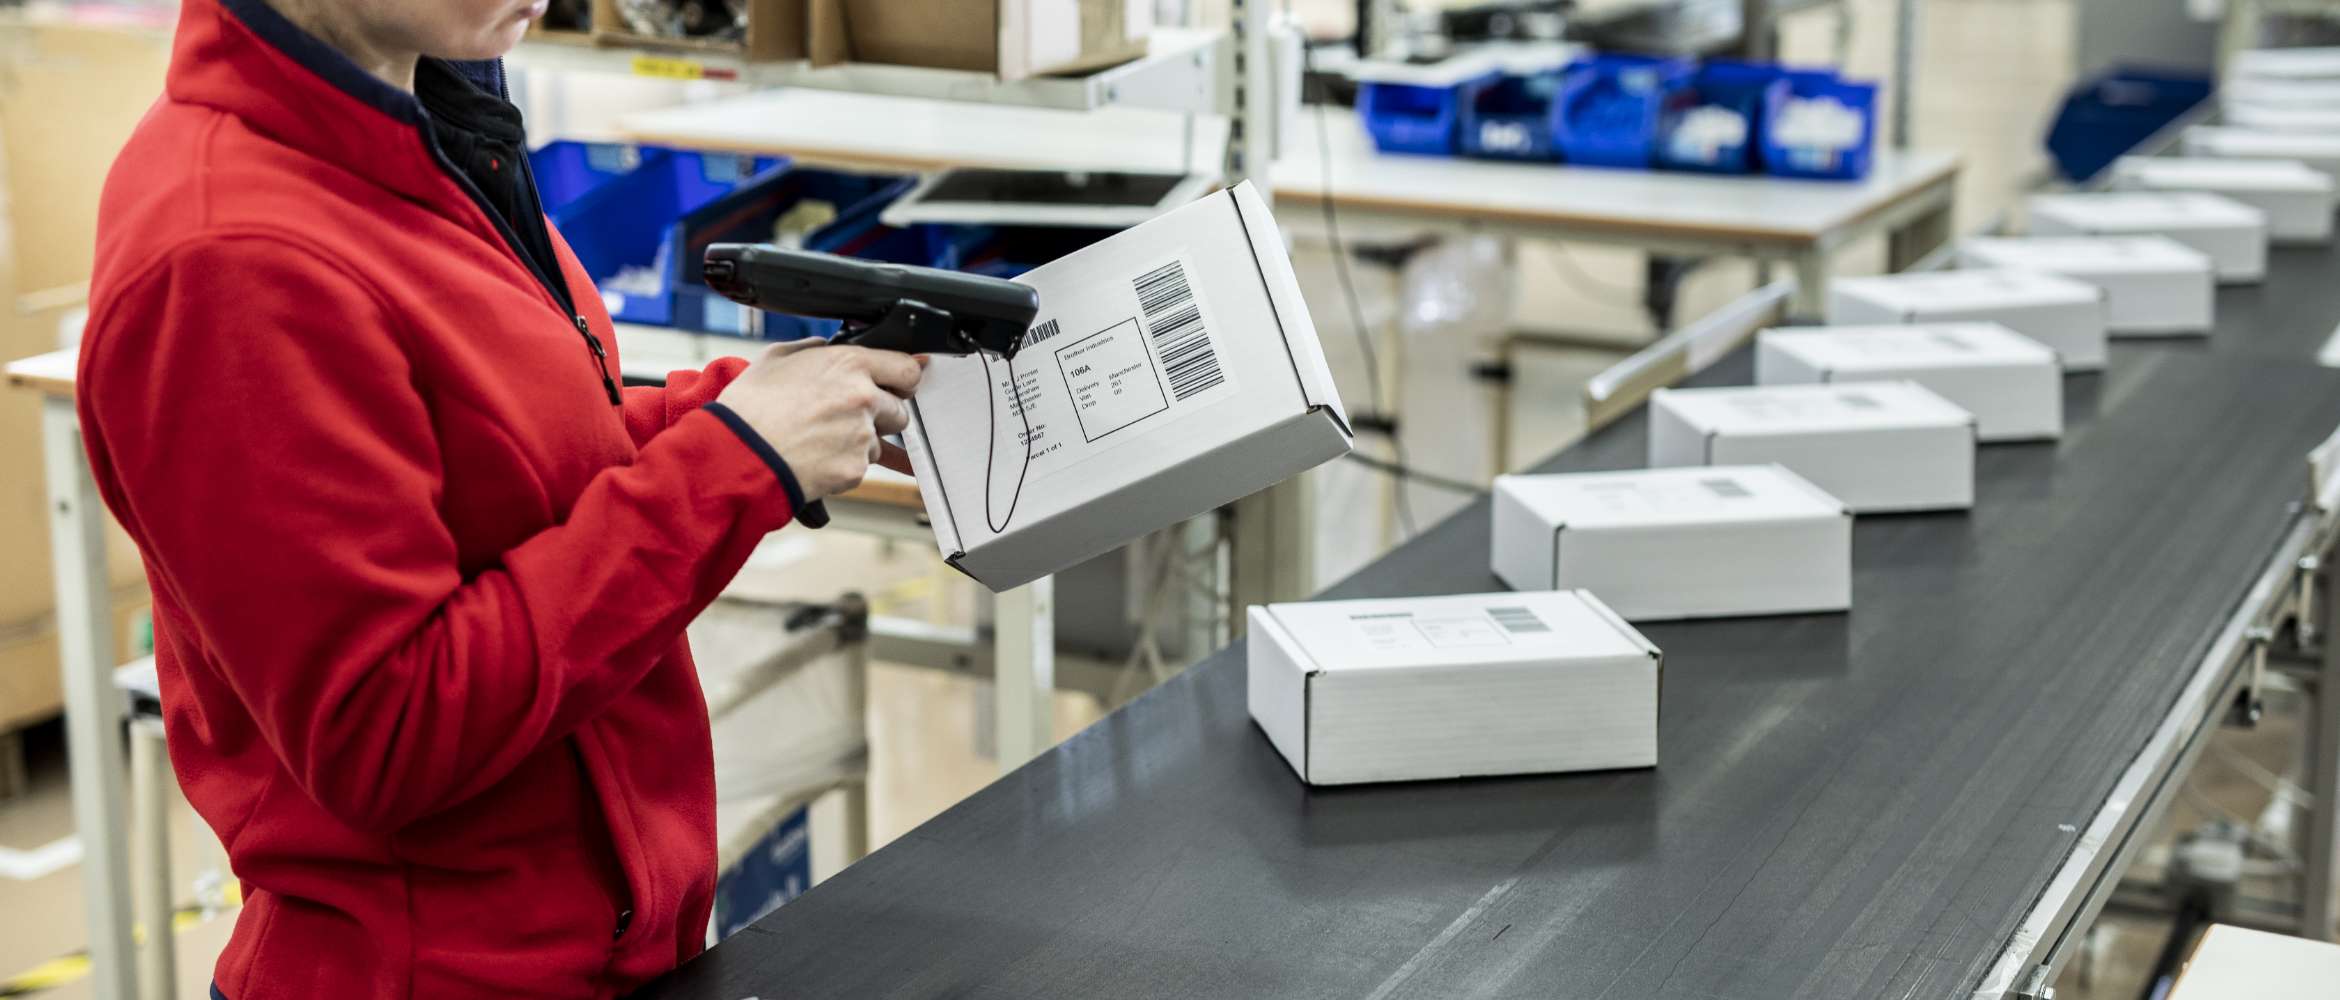 A factory conveyer production line is filled with boxed parcels while a worker scans a printed barcode address label in this transport and logistics warehouse scene